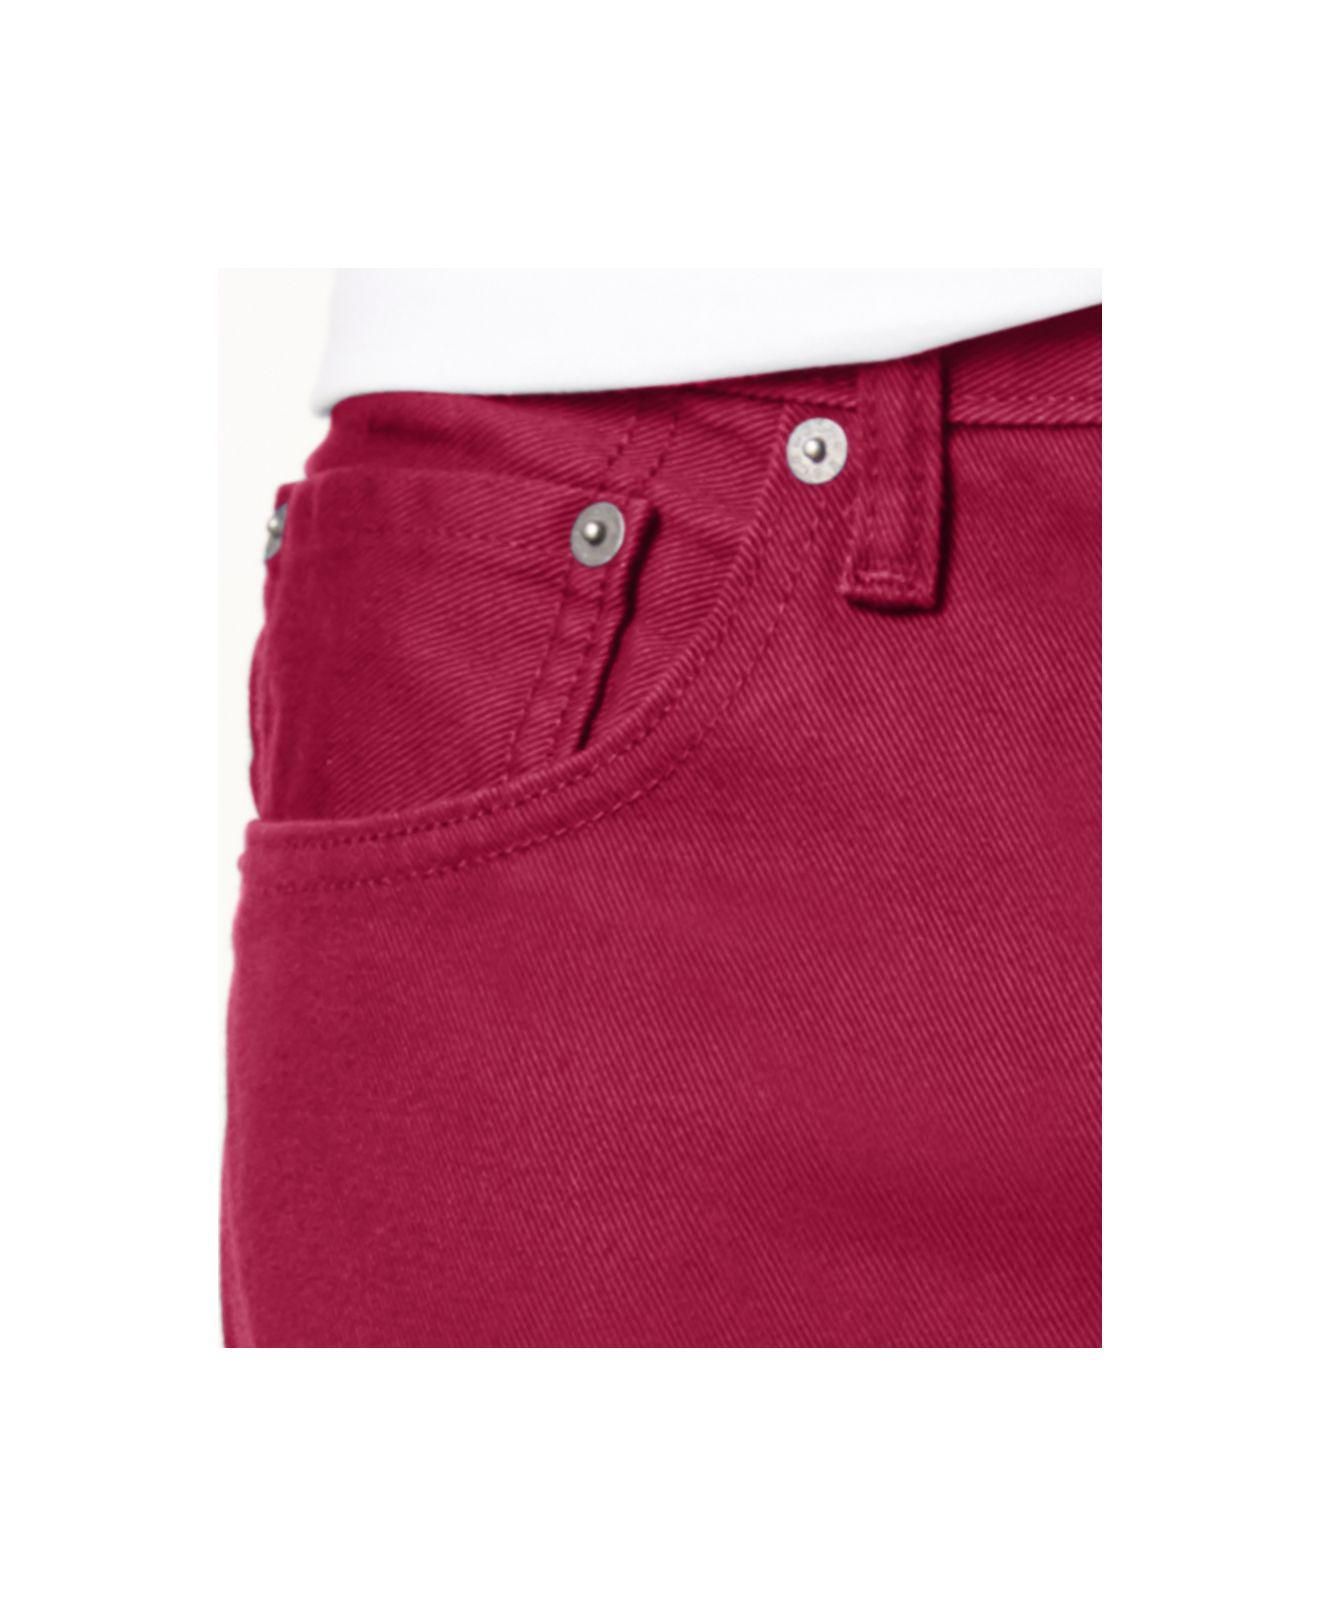 levis 541 red